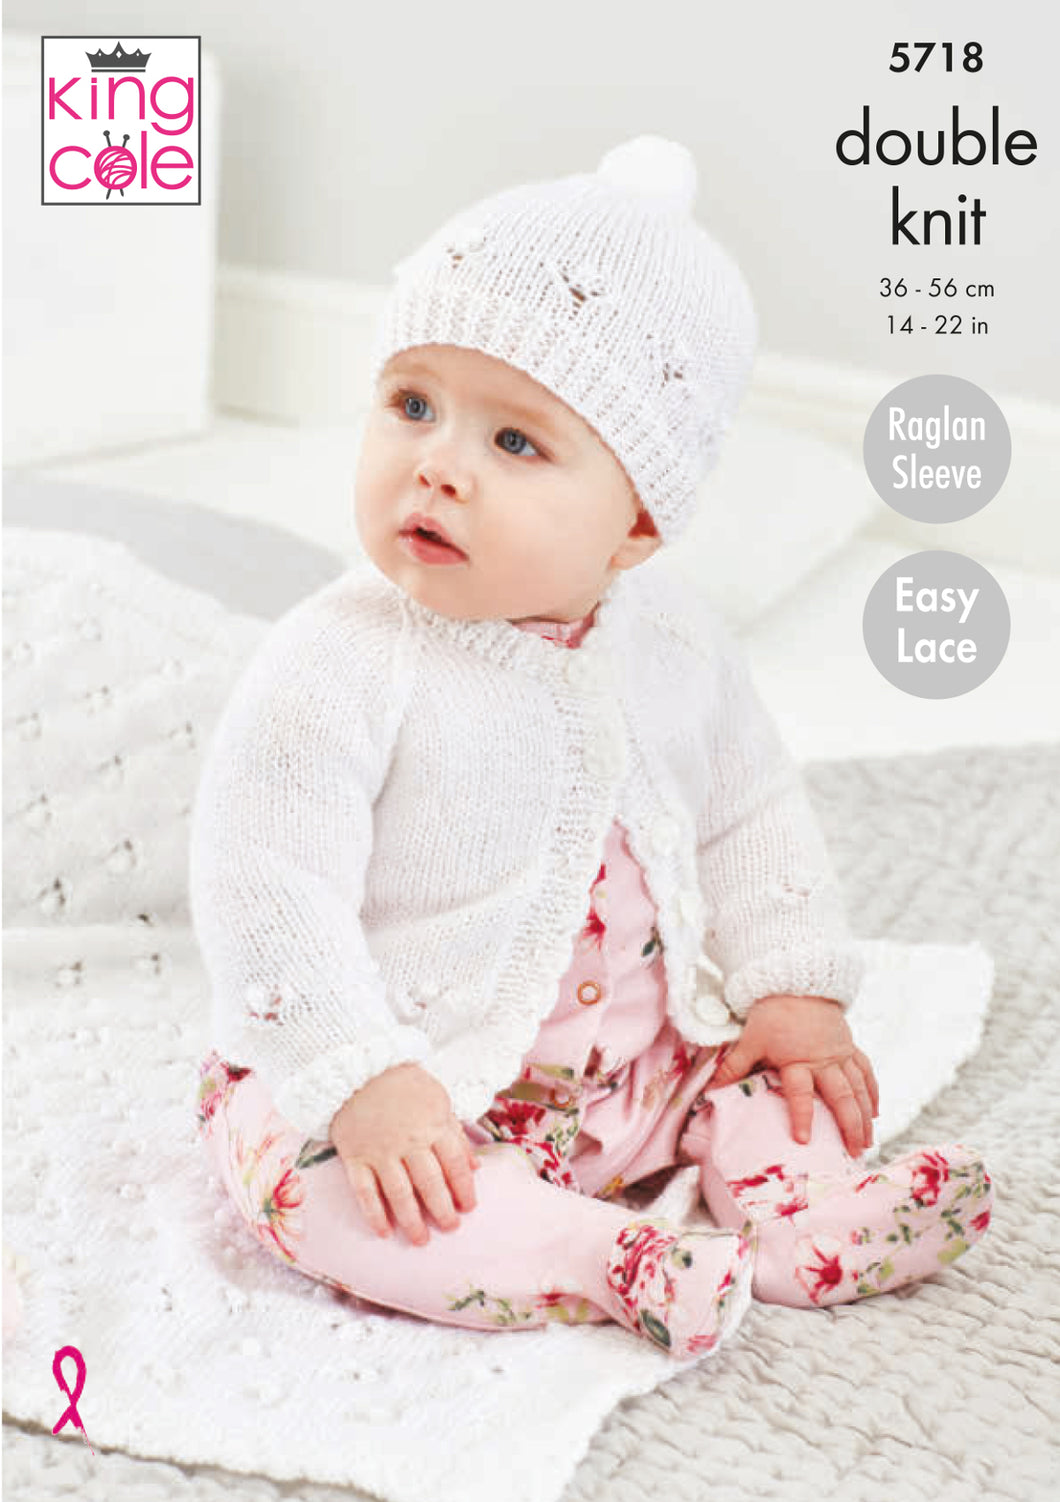 King Cole Double Knitting Pattern - Baby Cardigan Hat & Blanket (5718)